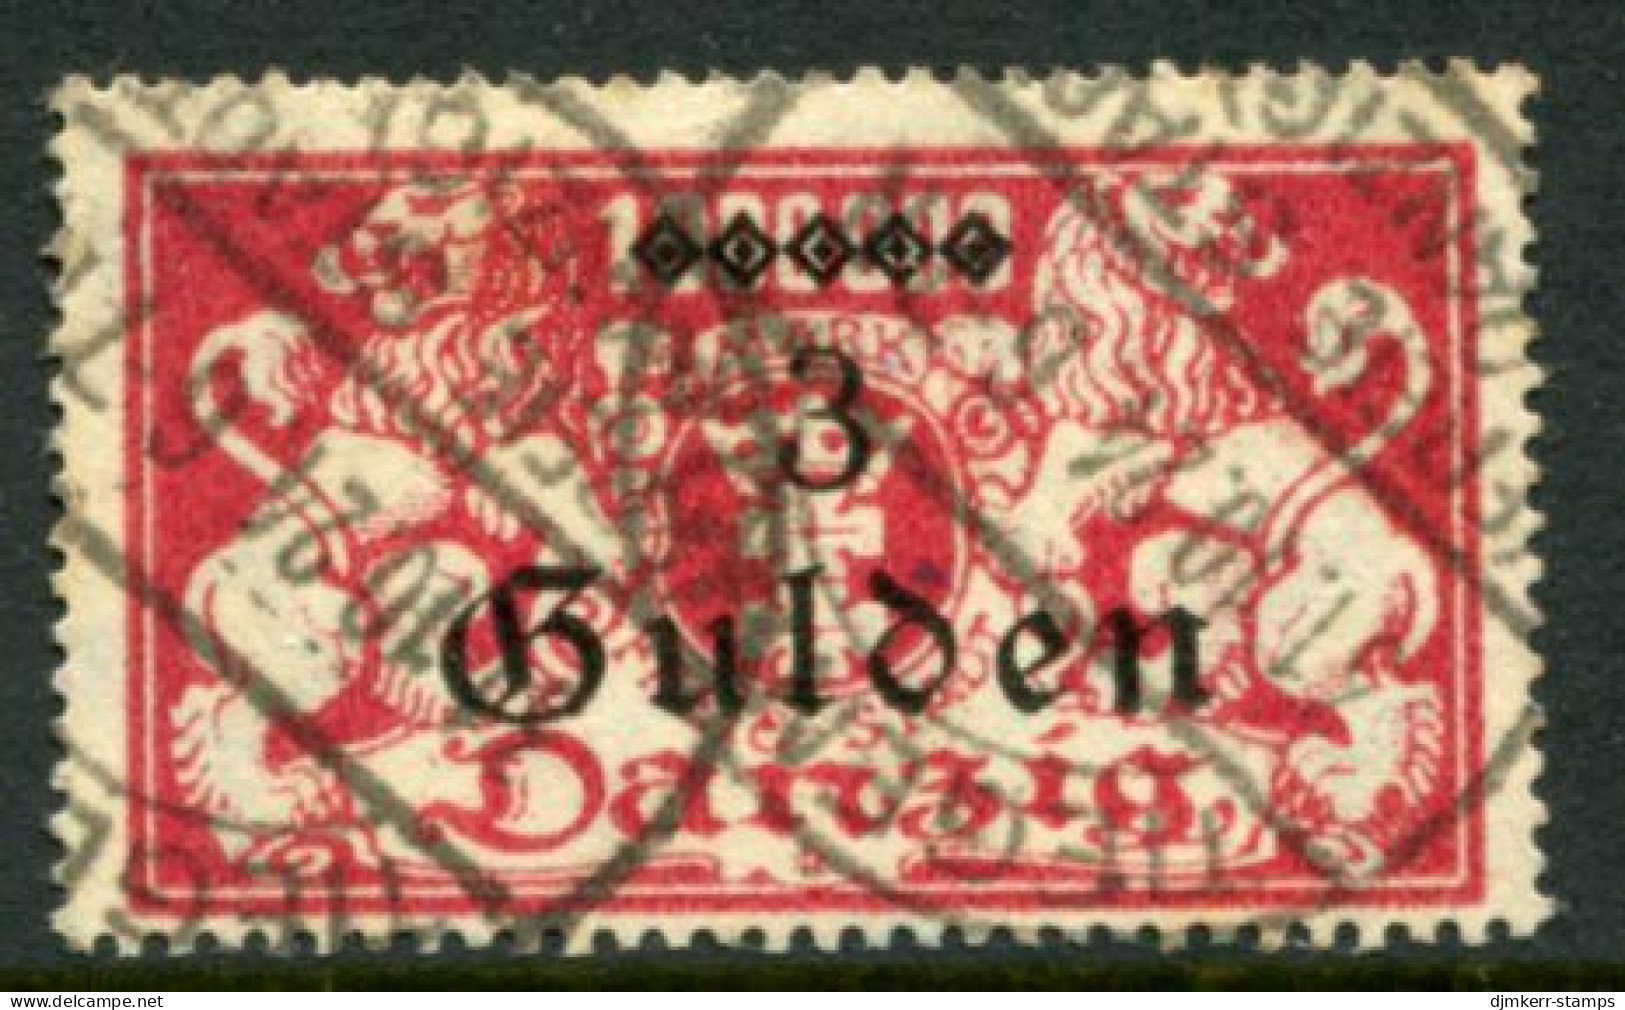 DANZIG 1923 Arms Definitive 3 G. On 1 Mio. Mk. Postally Used With Tiegenhof Postmark.  Michel 191 - Afgestempeld